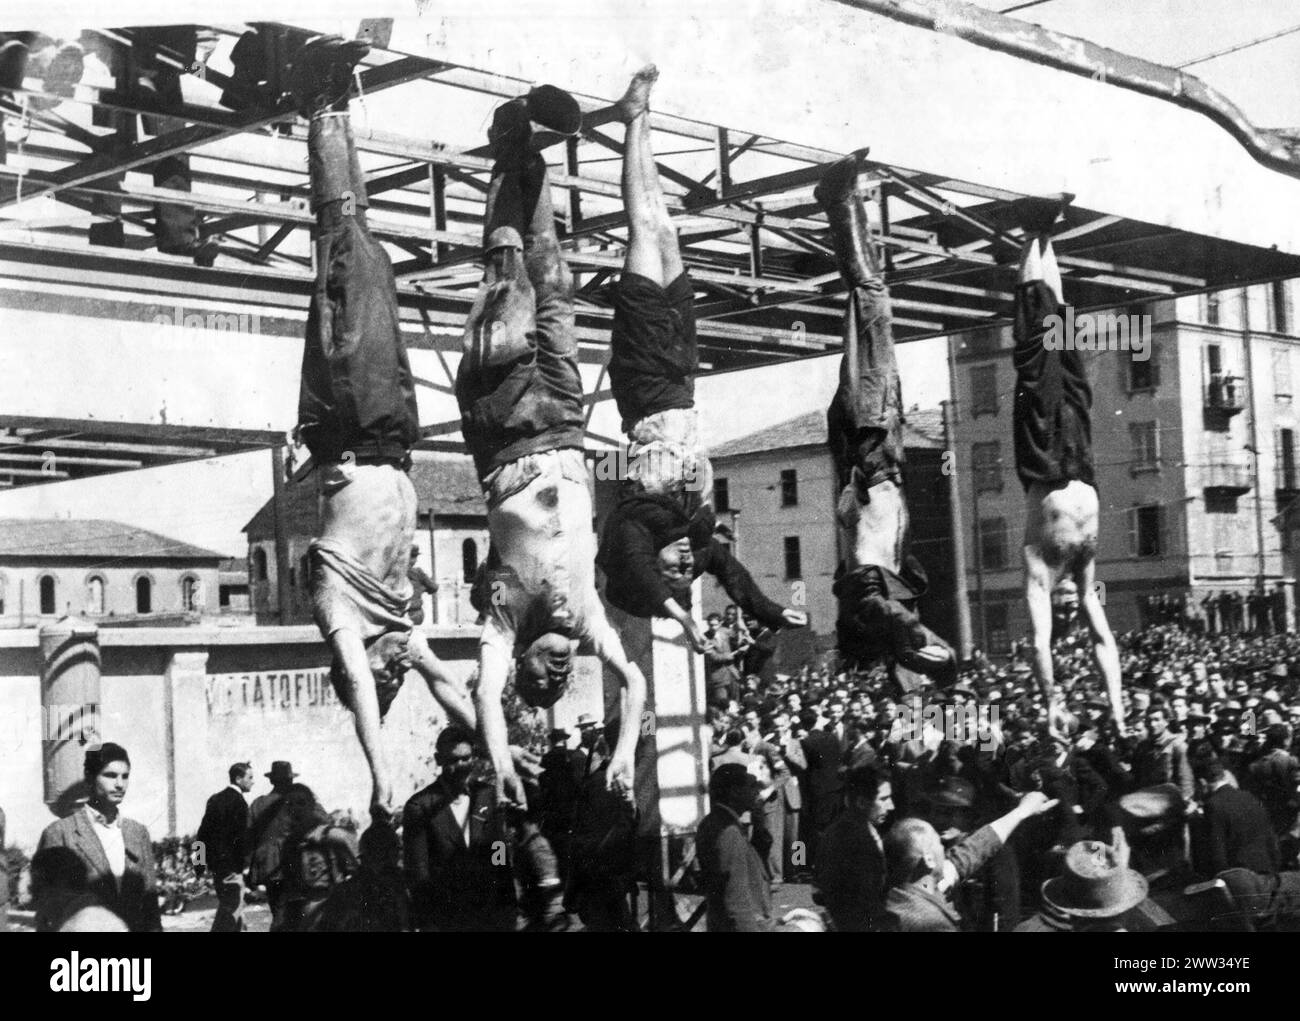 Executed dictator - From left to right, the bodies of Bombacci, Mussolini, Petacci, Pavolini and Starace in Piazzale Loreto, 1945 Stock Photo